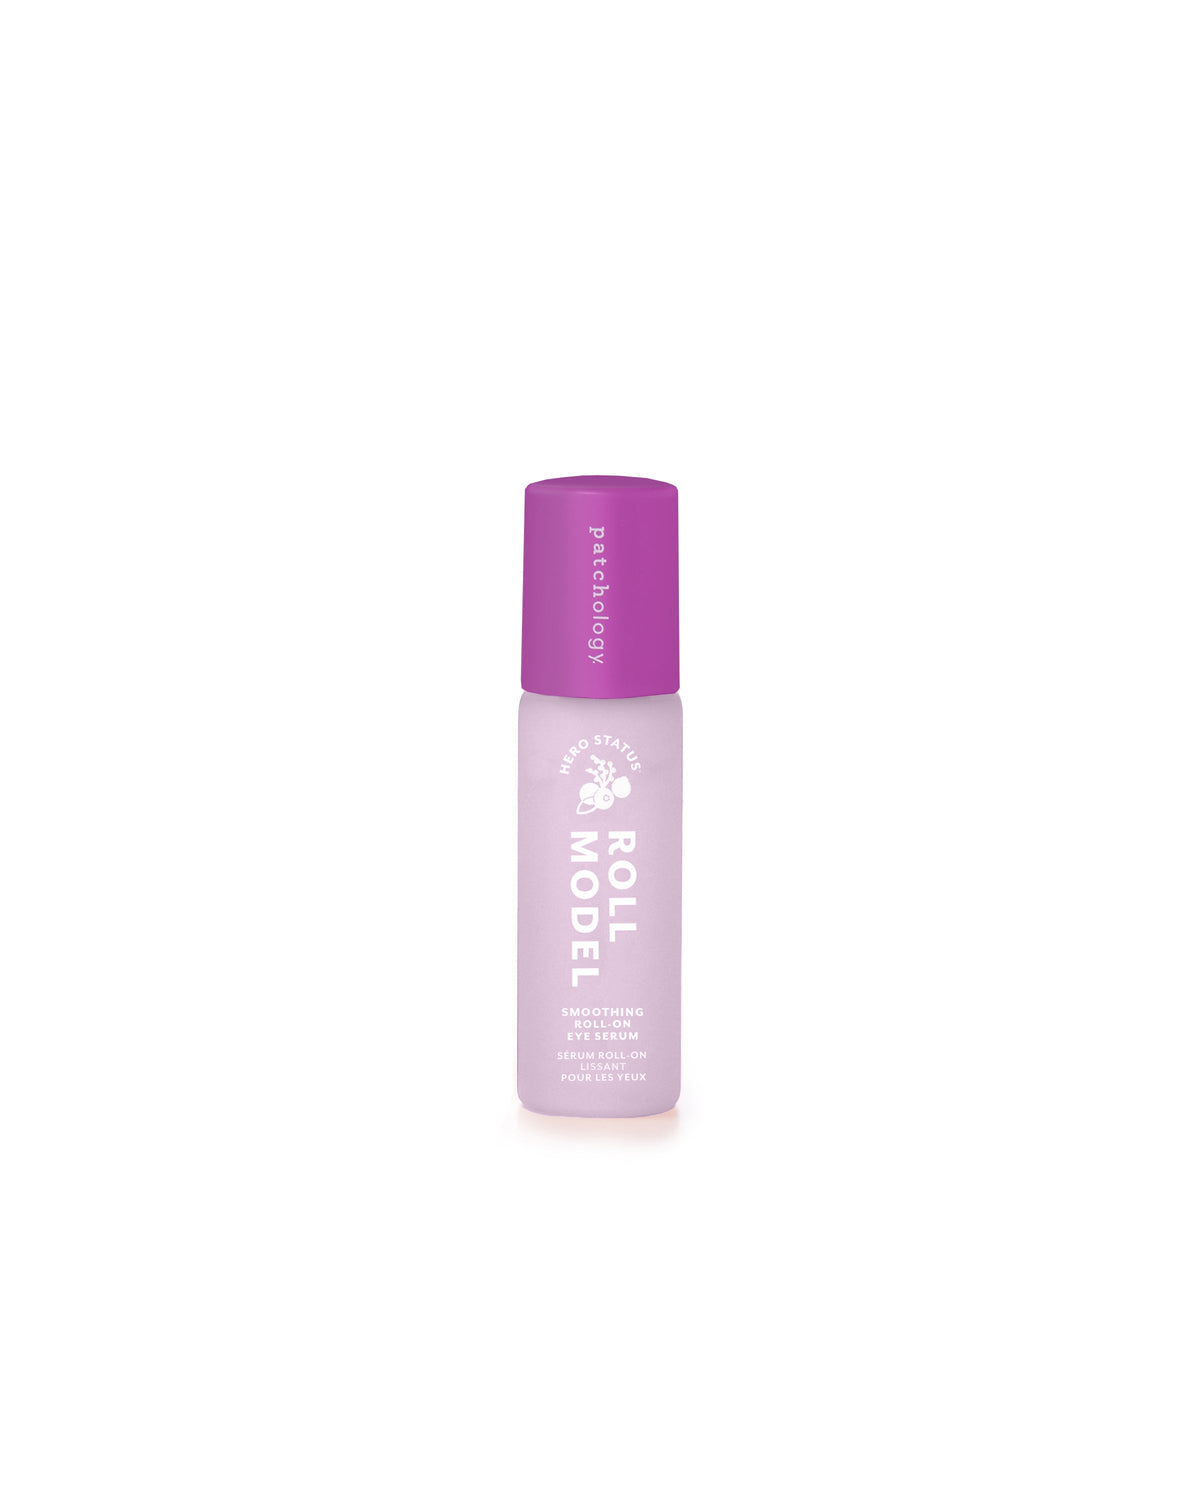 Patchology Roll Model Smoothing Roll-On Eye Serum, 1.2 oz